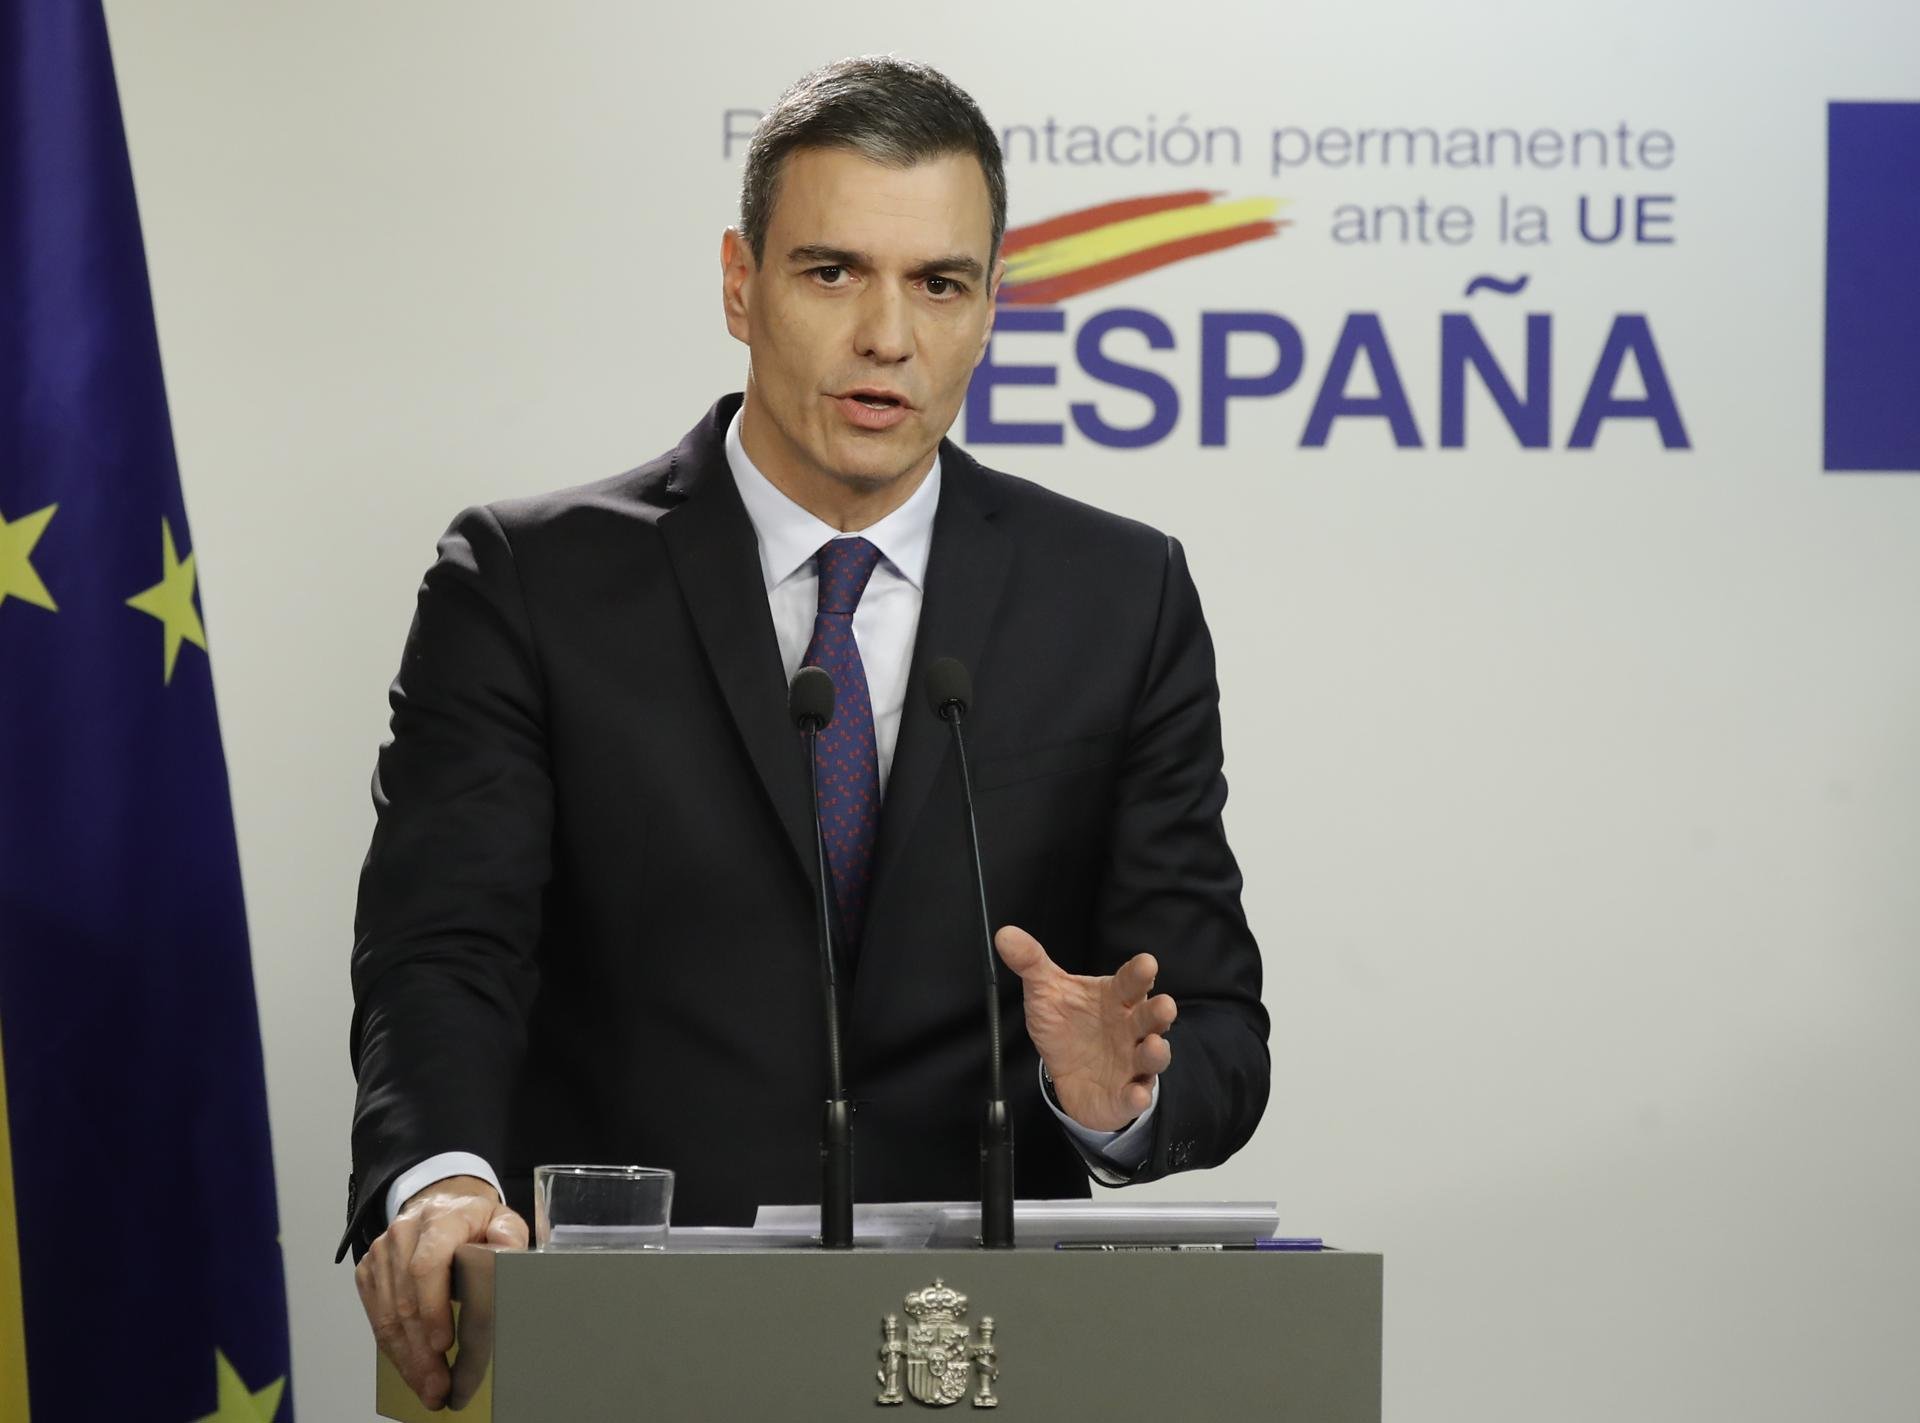 Sánchez will abide by court's ruling but will take "precise measures" to renew its judges